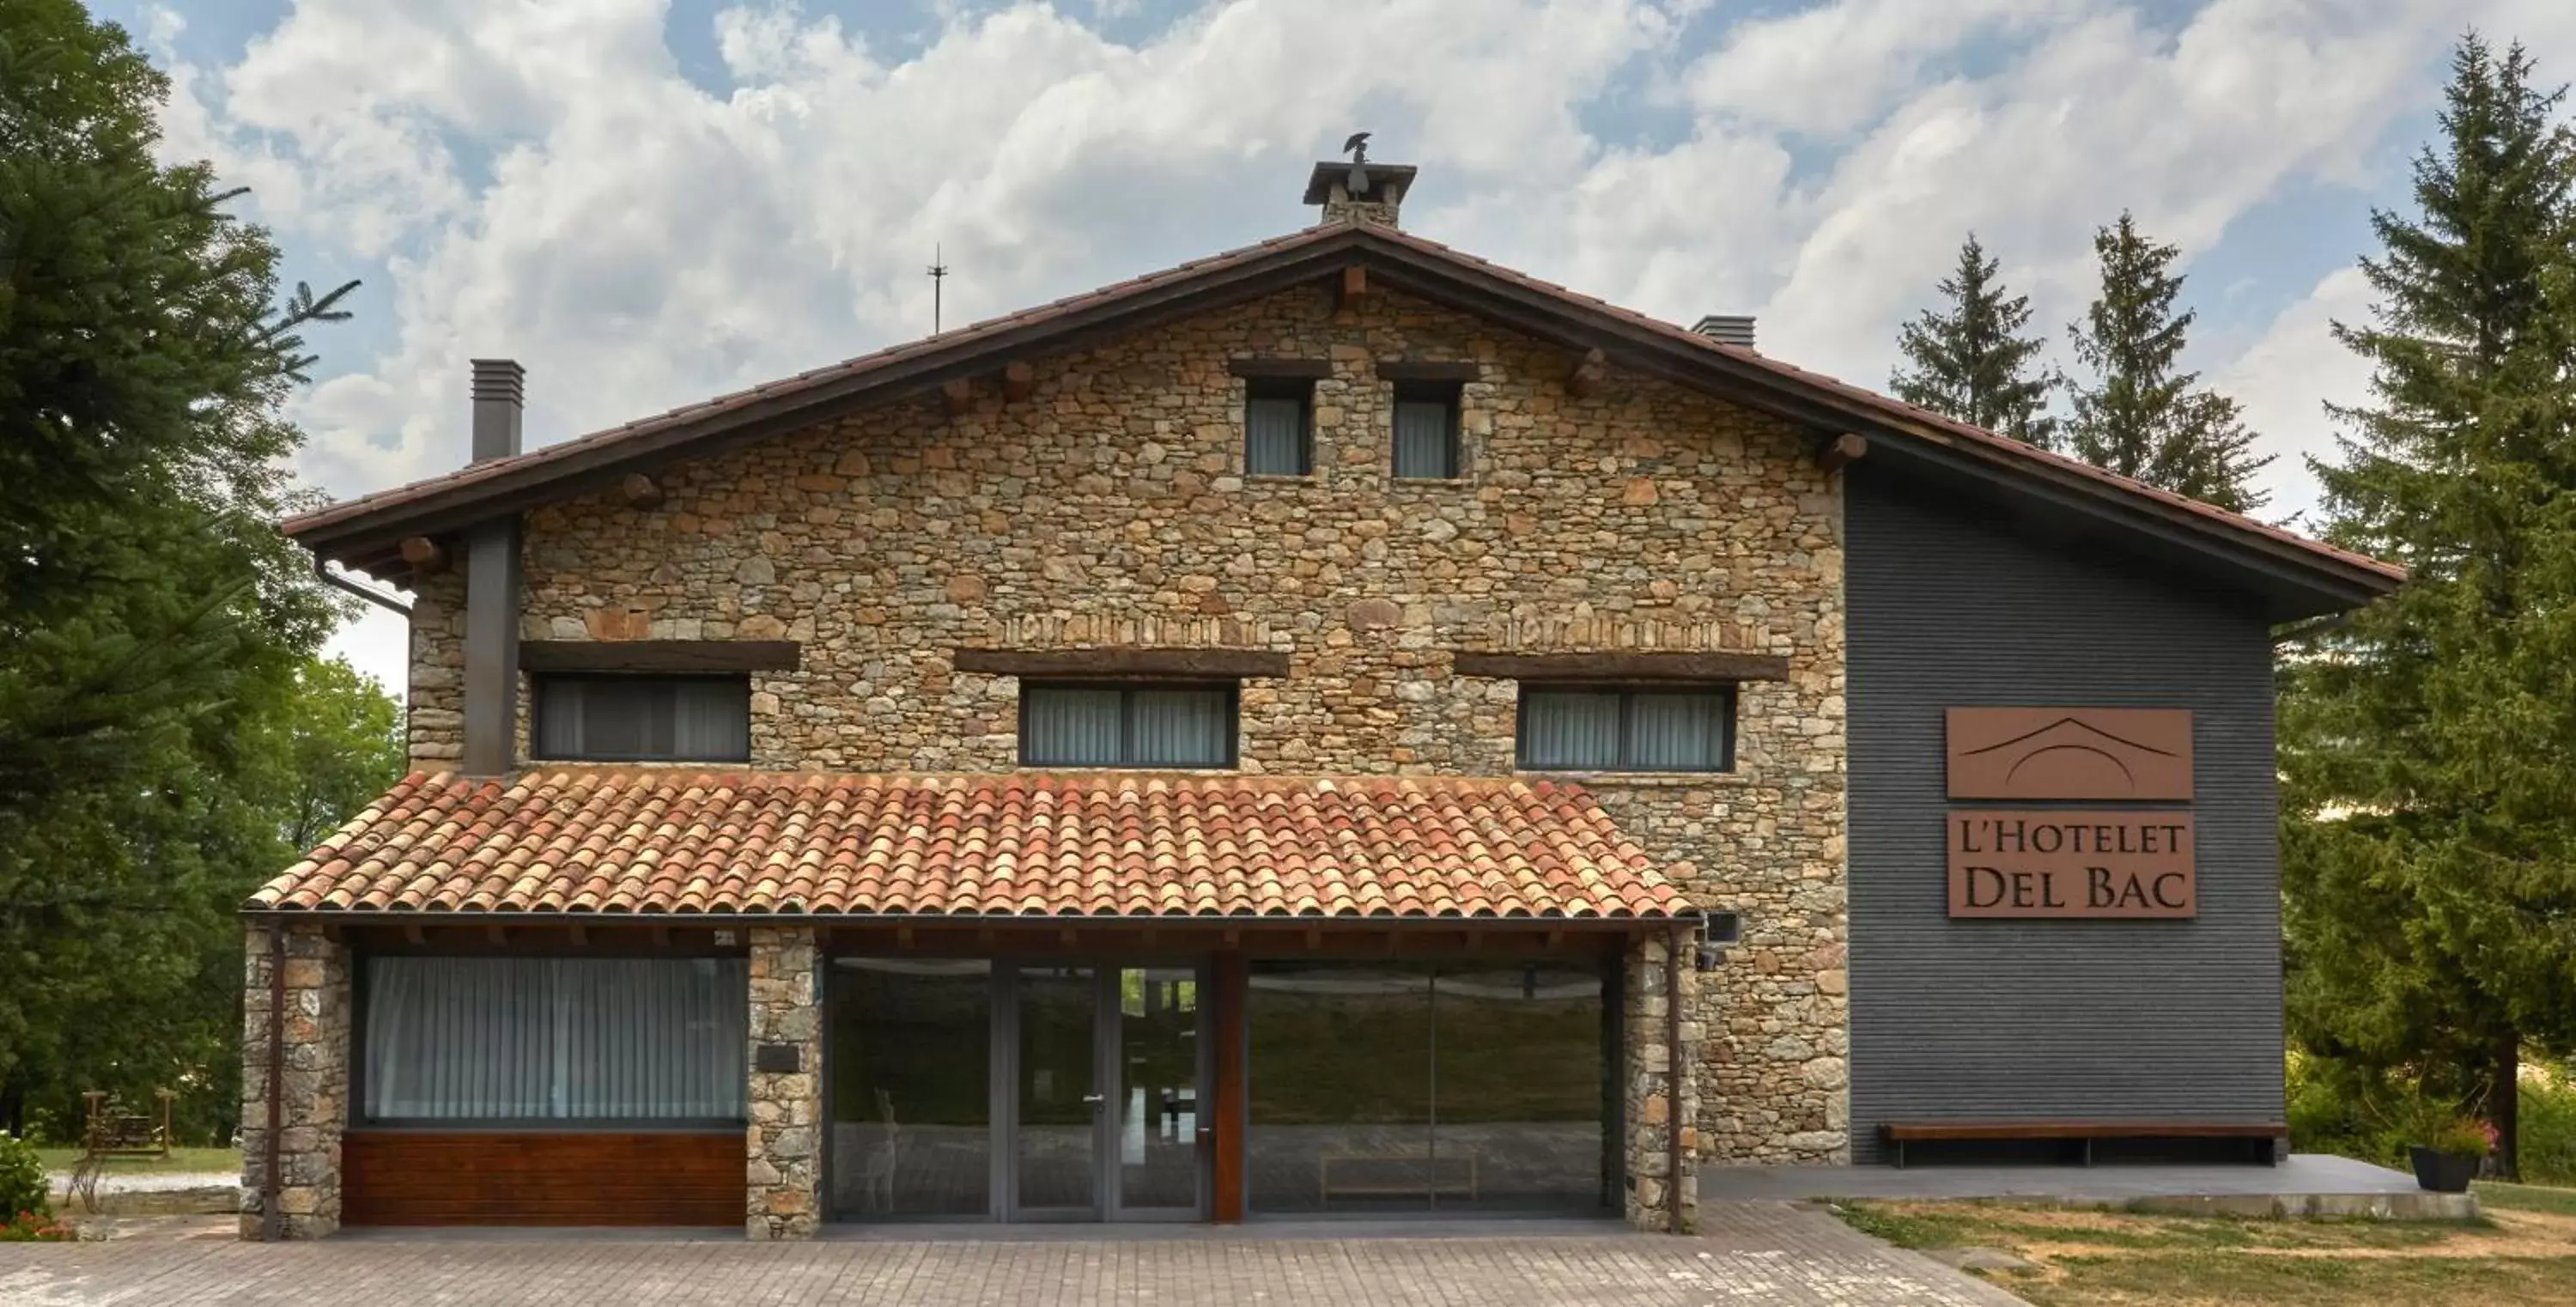 Property Building in Hotelet Del Bac